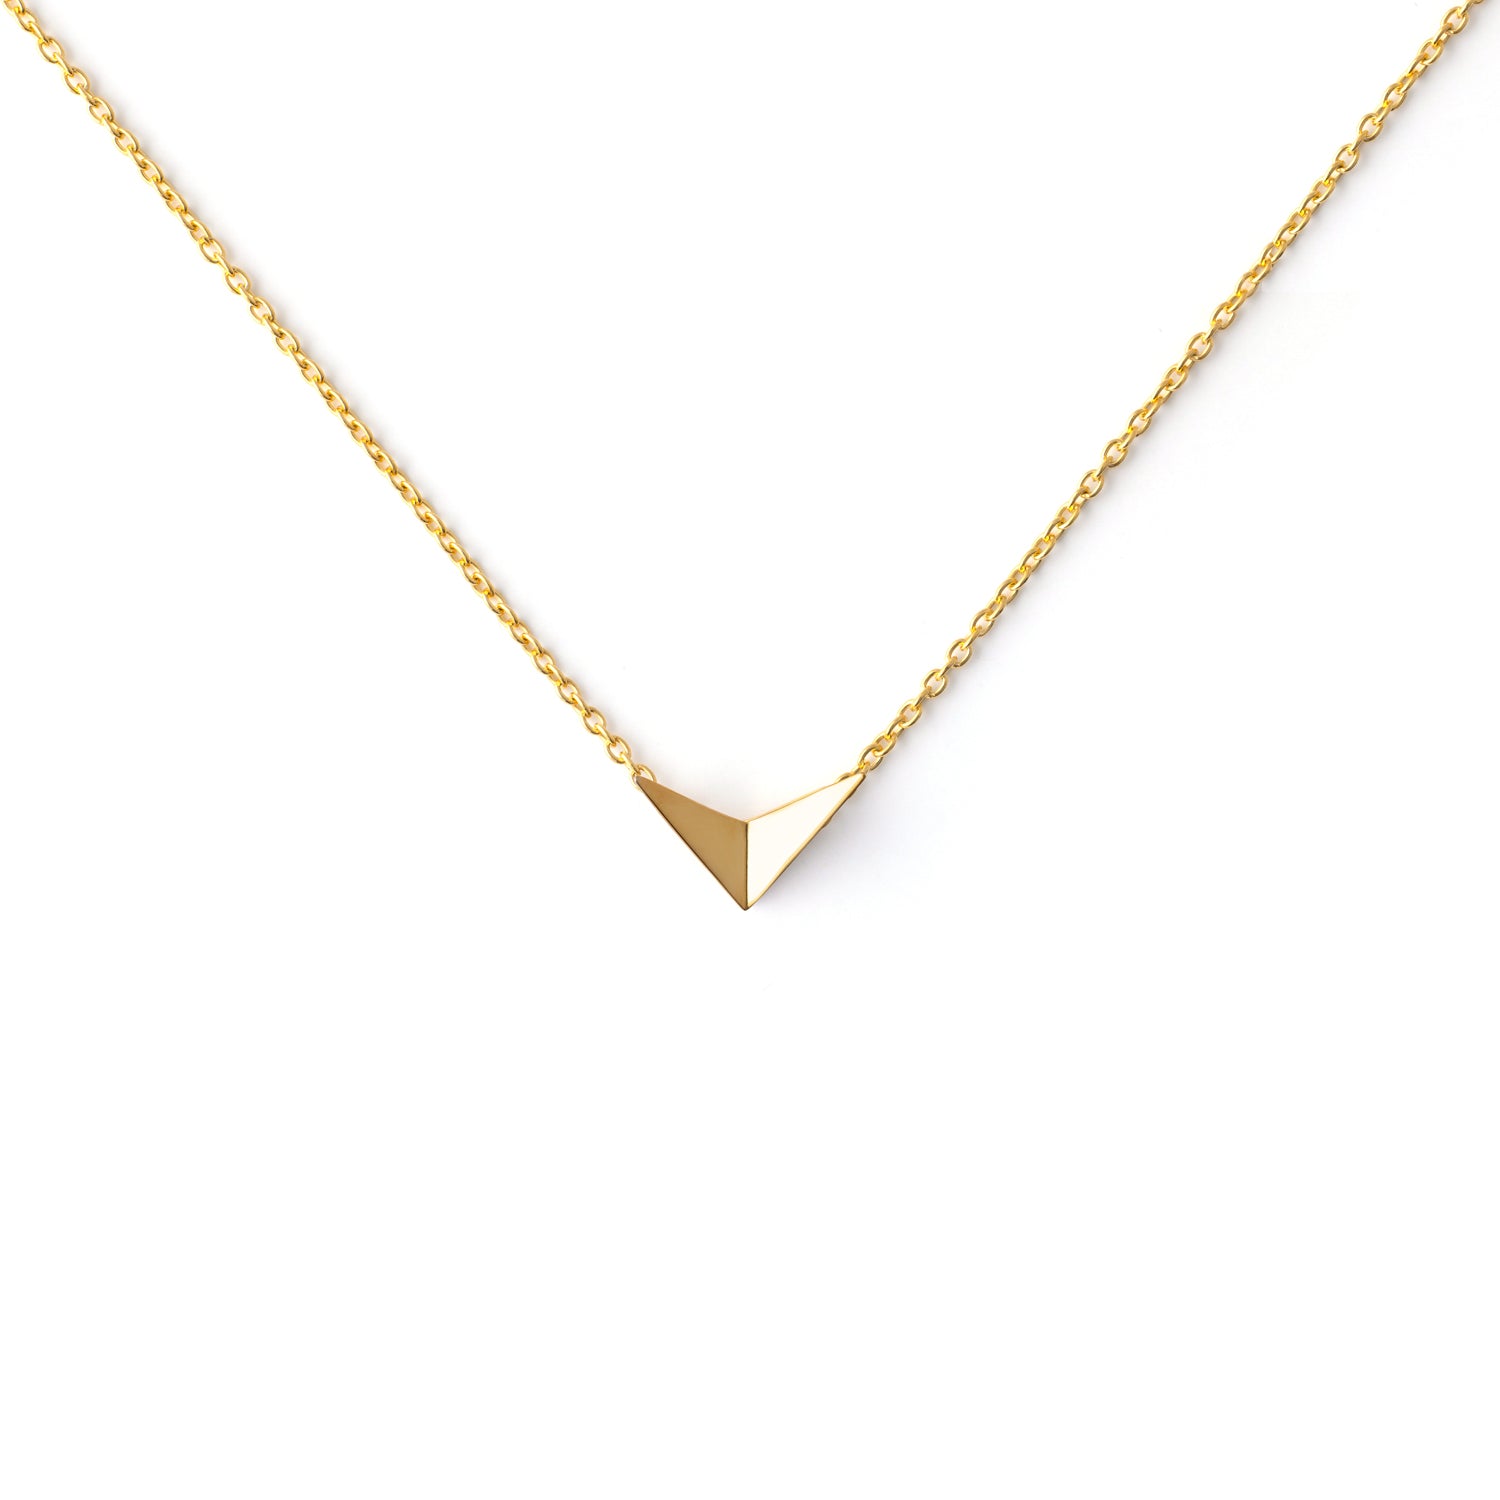 Small bird necklace in gold